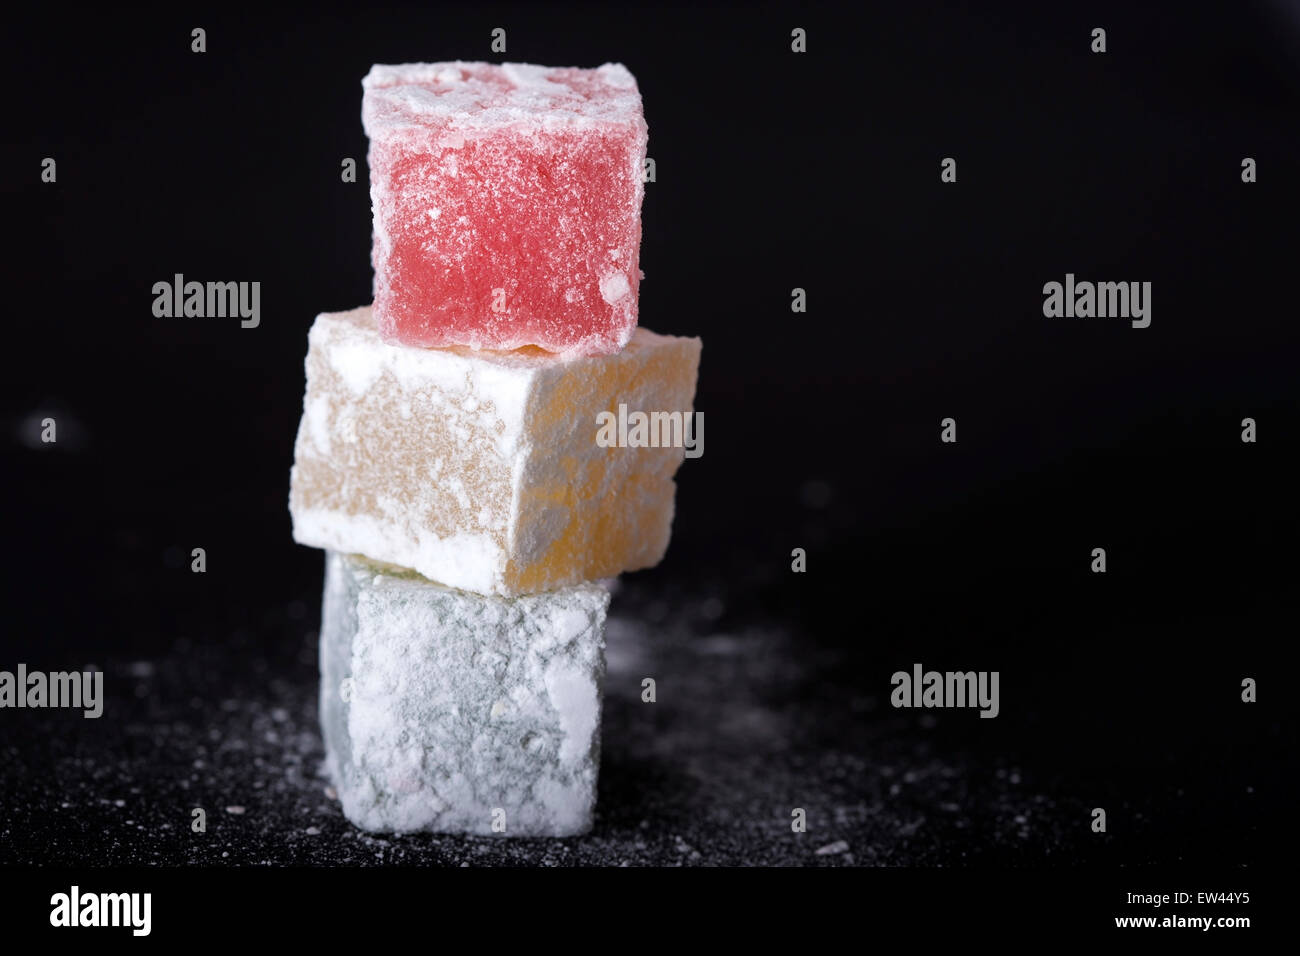 Turkish delight pieces over black background Stock Photo